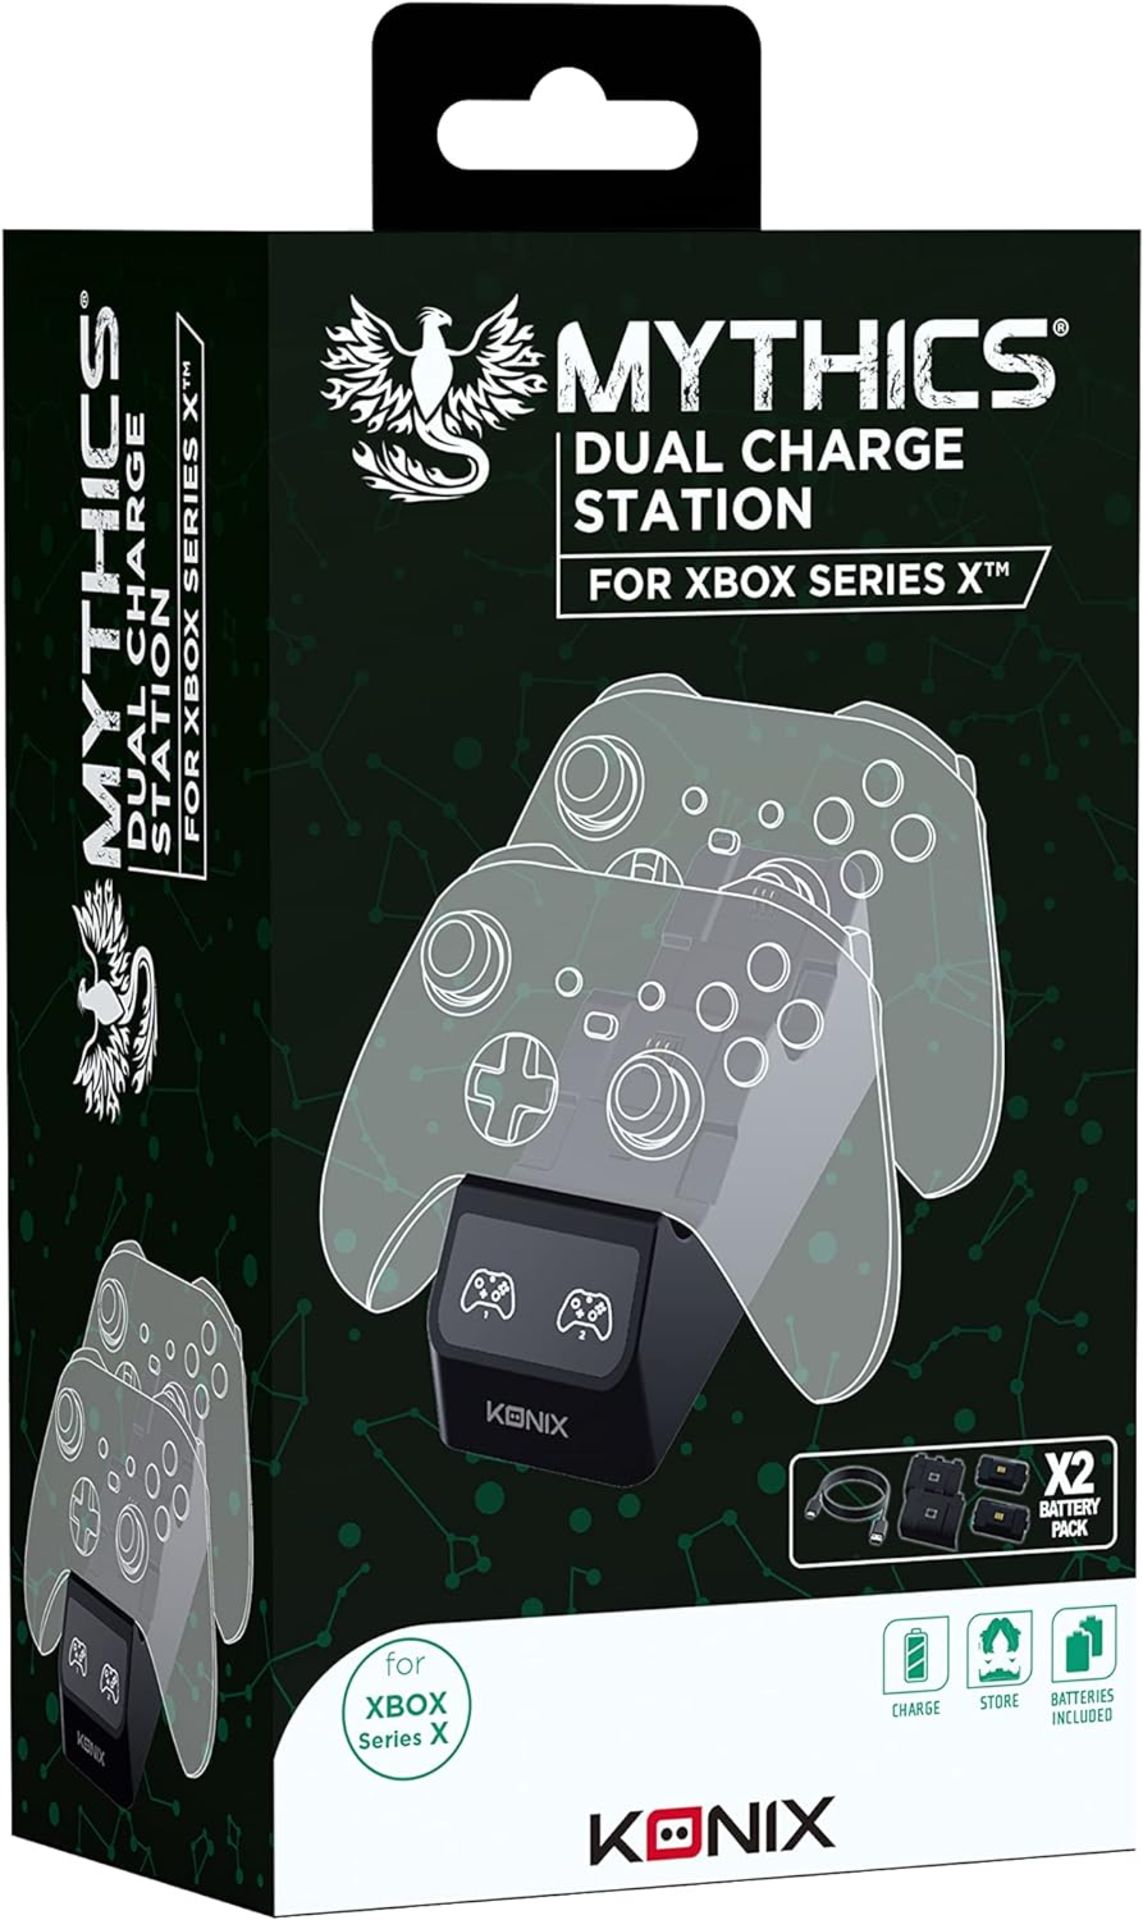 6x BRAND NEW KONIX MYTHICS DUAL CHARGE STATION FOR XBOX SERIES X CONTROLLERS. (R15-12)